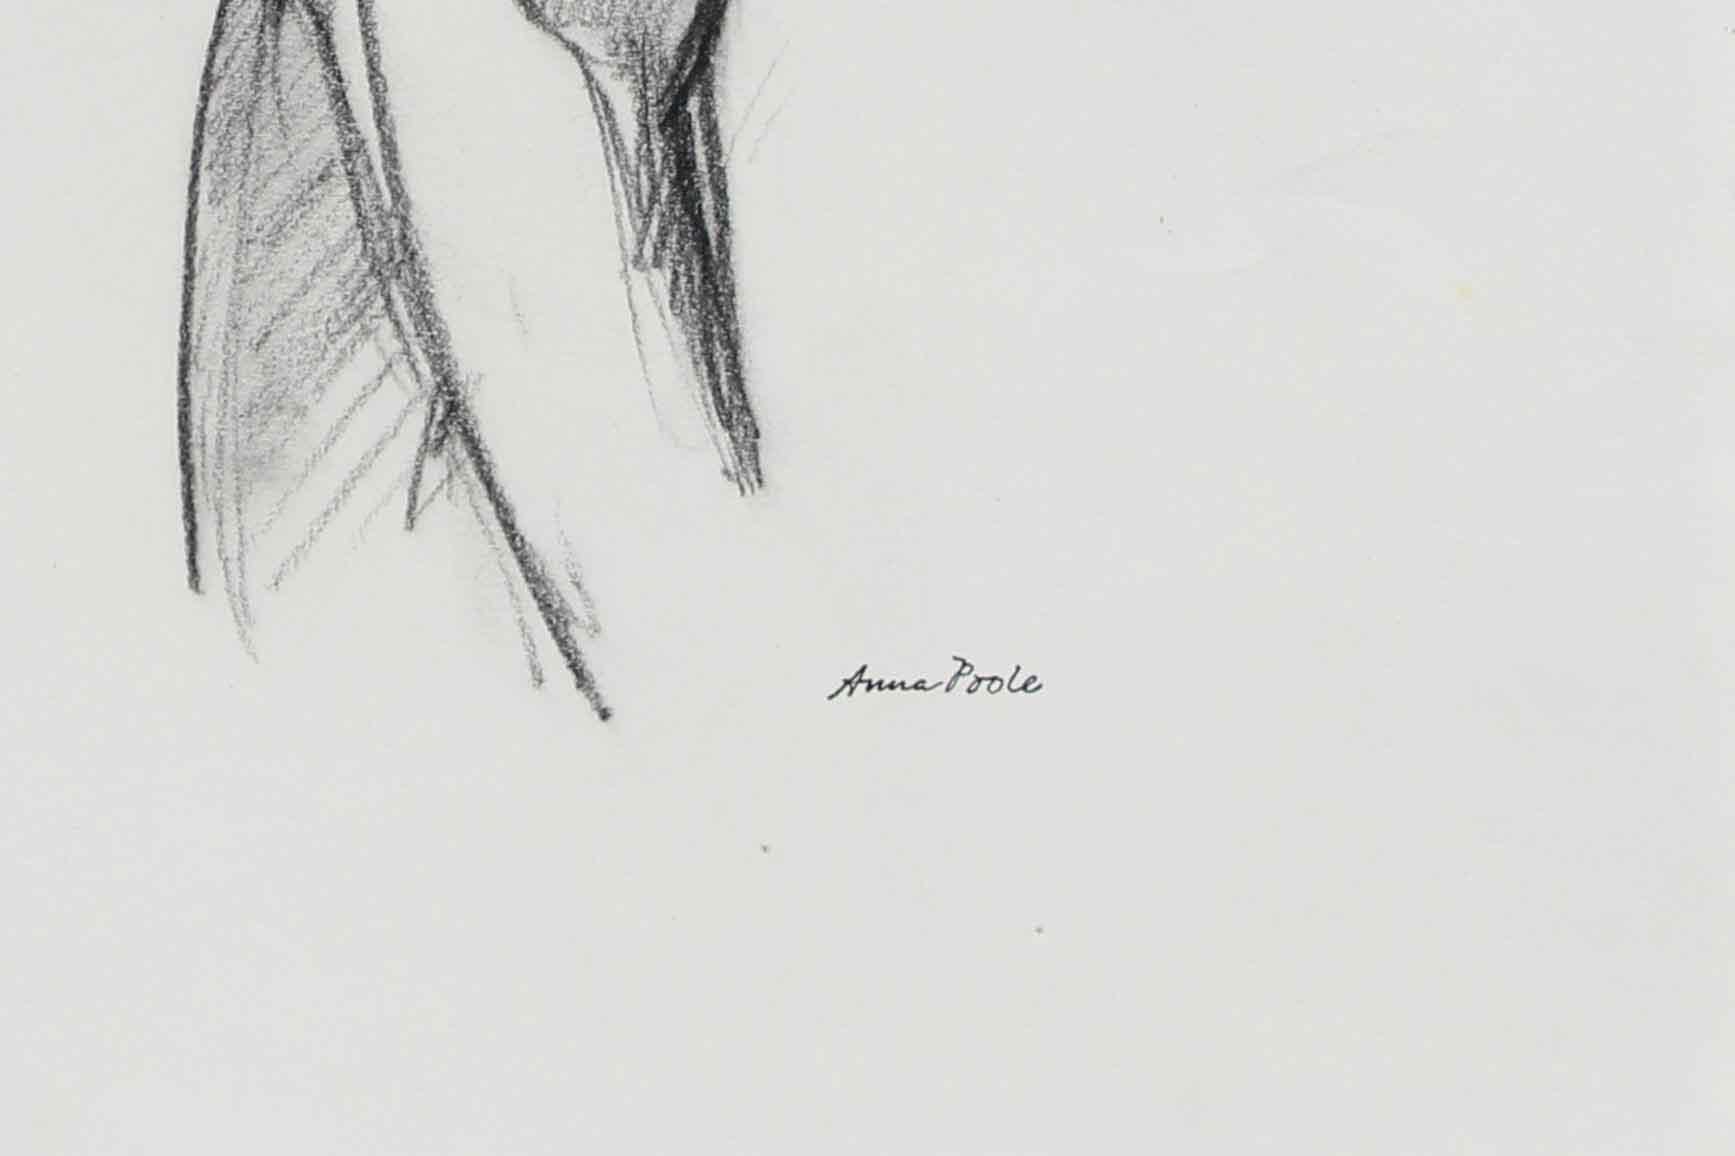 Monochromatic Figure Drawing, Graphite on Paper, Late 20th Century - Contemporary Art by Anna Poole